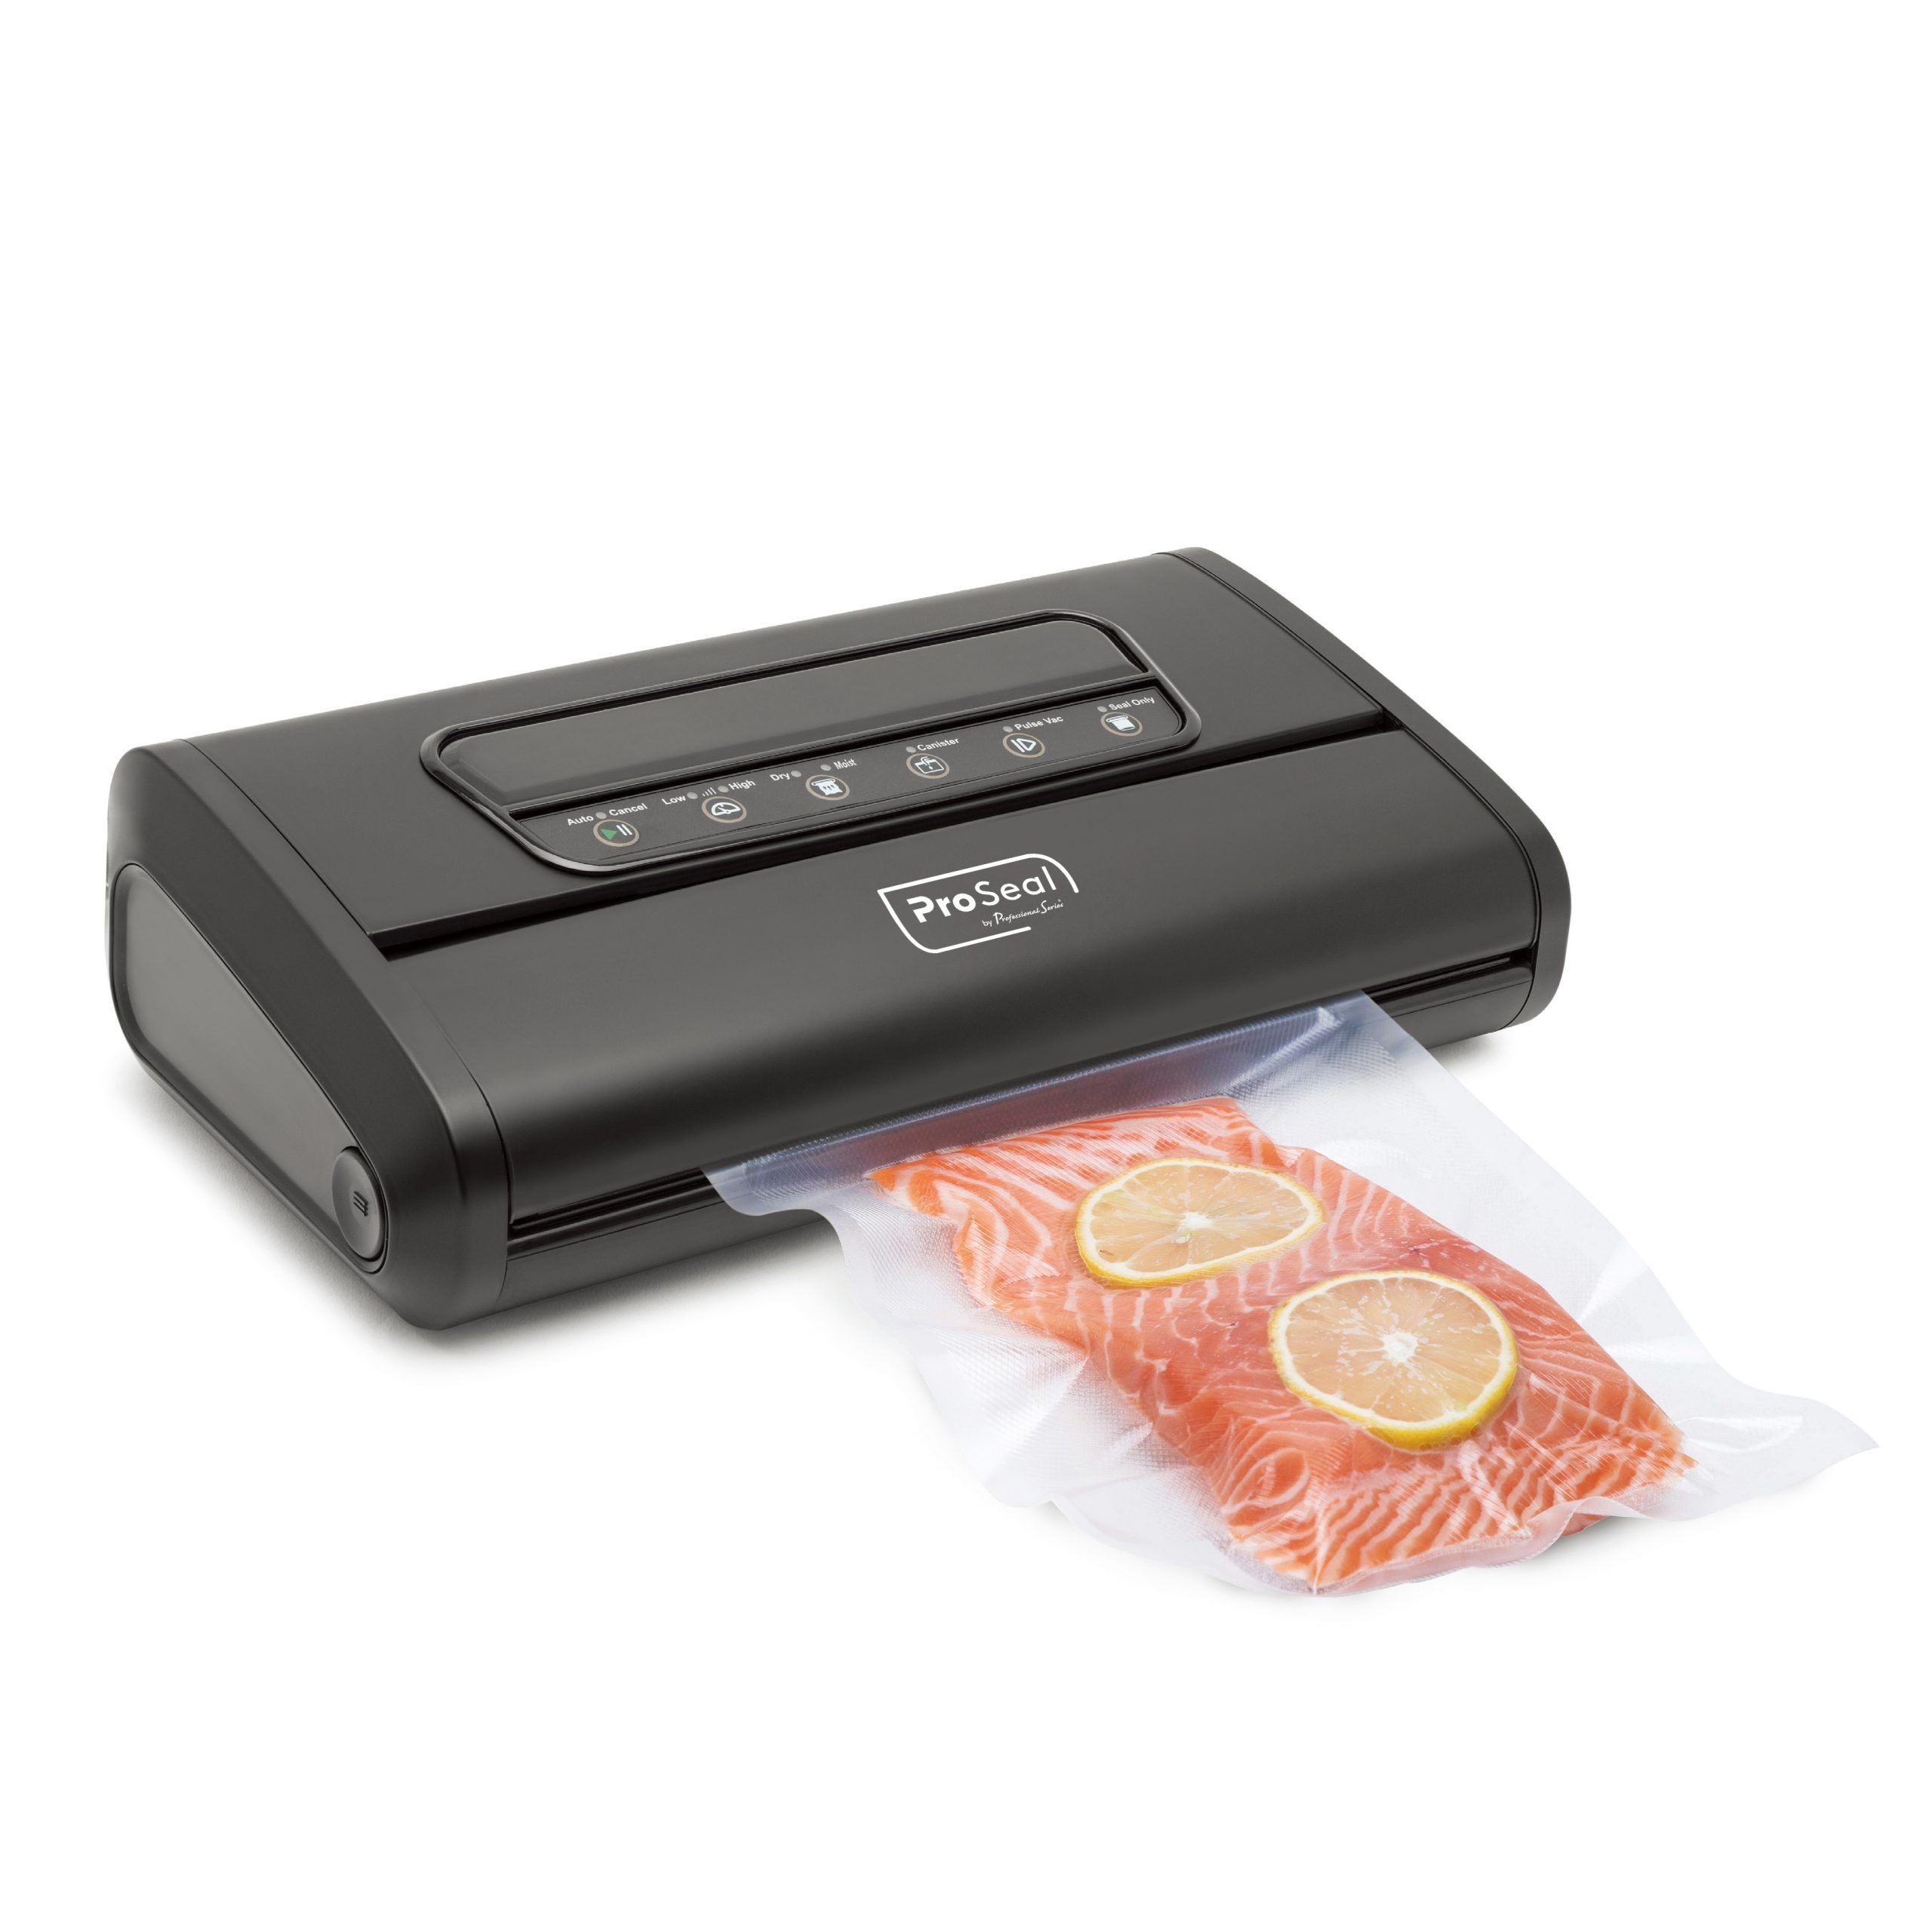 YONGSTYLE Vacuum Sealer Machine - Includes 1 Roll of Vacuum Sealer Bags,  All-in-One Vacuum Sealer Machine for Sous Vide, Freezer Storage, and More,  Designed in St. Louis, Onyx Black